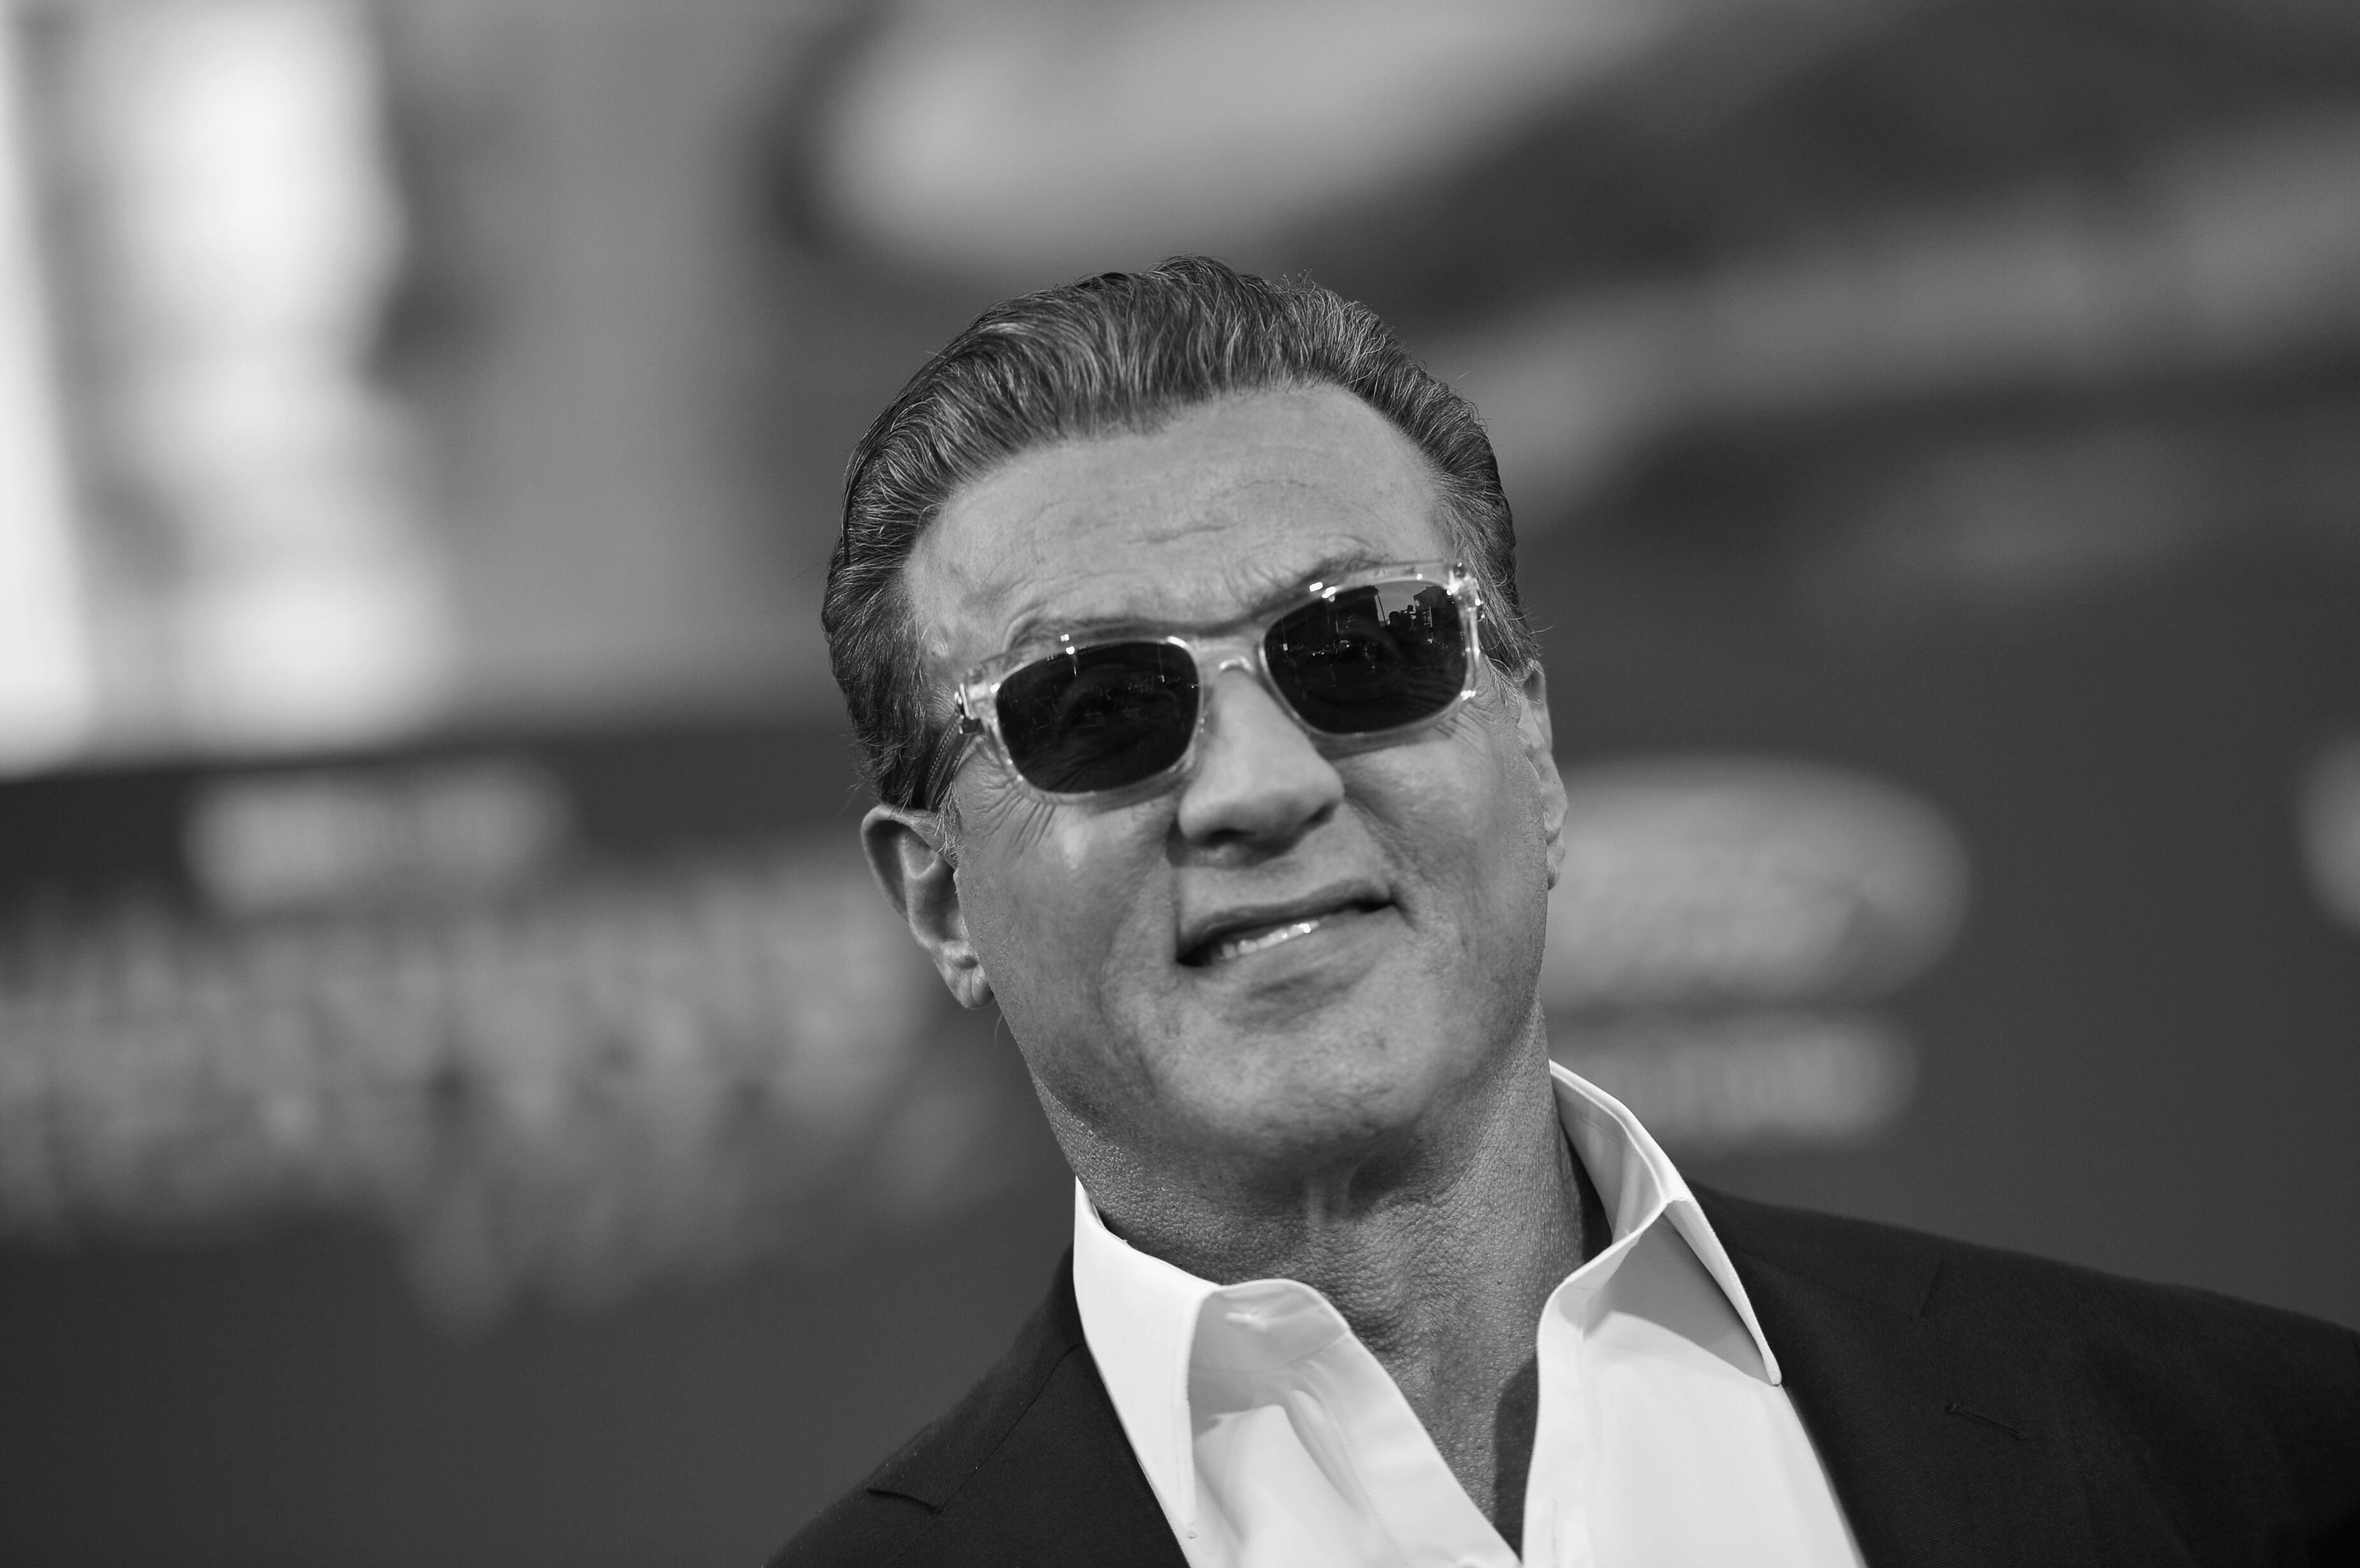 HOLLYWOOD, CA - APRIL 19:  (EDITORS NOTE: Image has been shot in black and white. Color version not available.) Actor Sylvester Stallone at The World Premiere of Marvel Studios Guardians of the Galaxy Vol. 2. at Dolby Theatre in Hollywood, CA April 